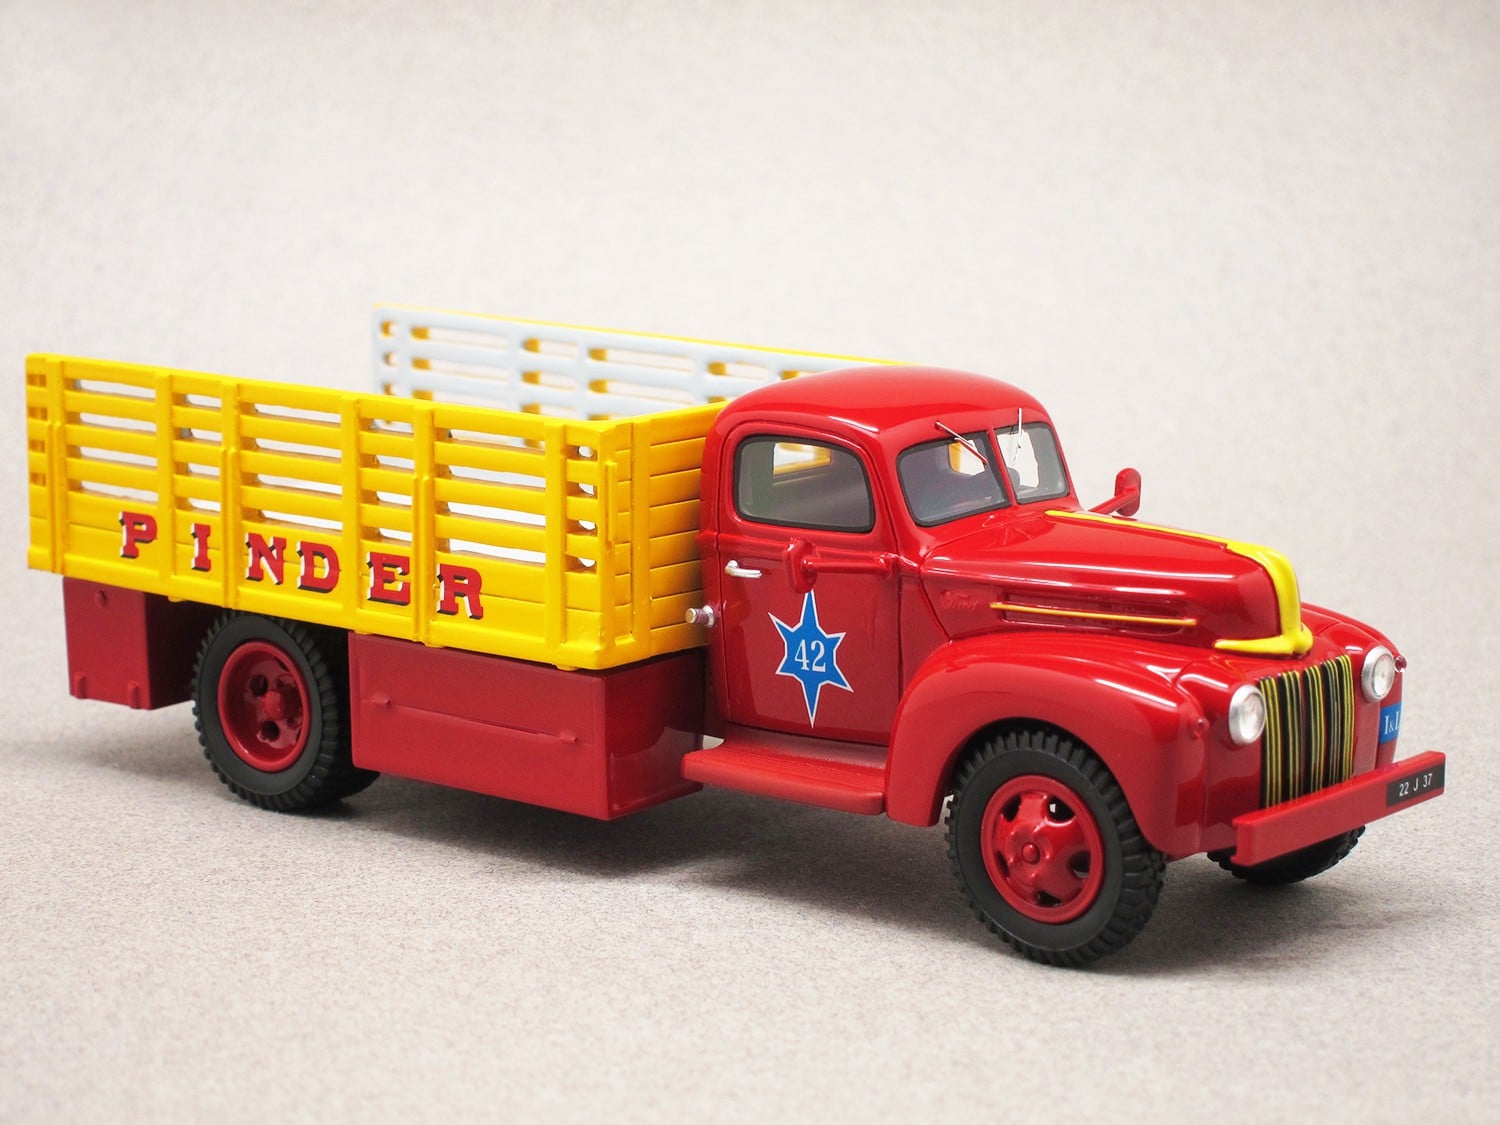 Ford Canada 1947 Pinder Circus (Perfex) 1:43